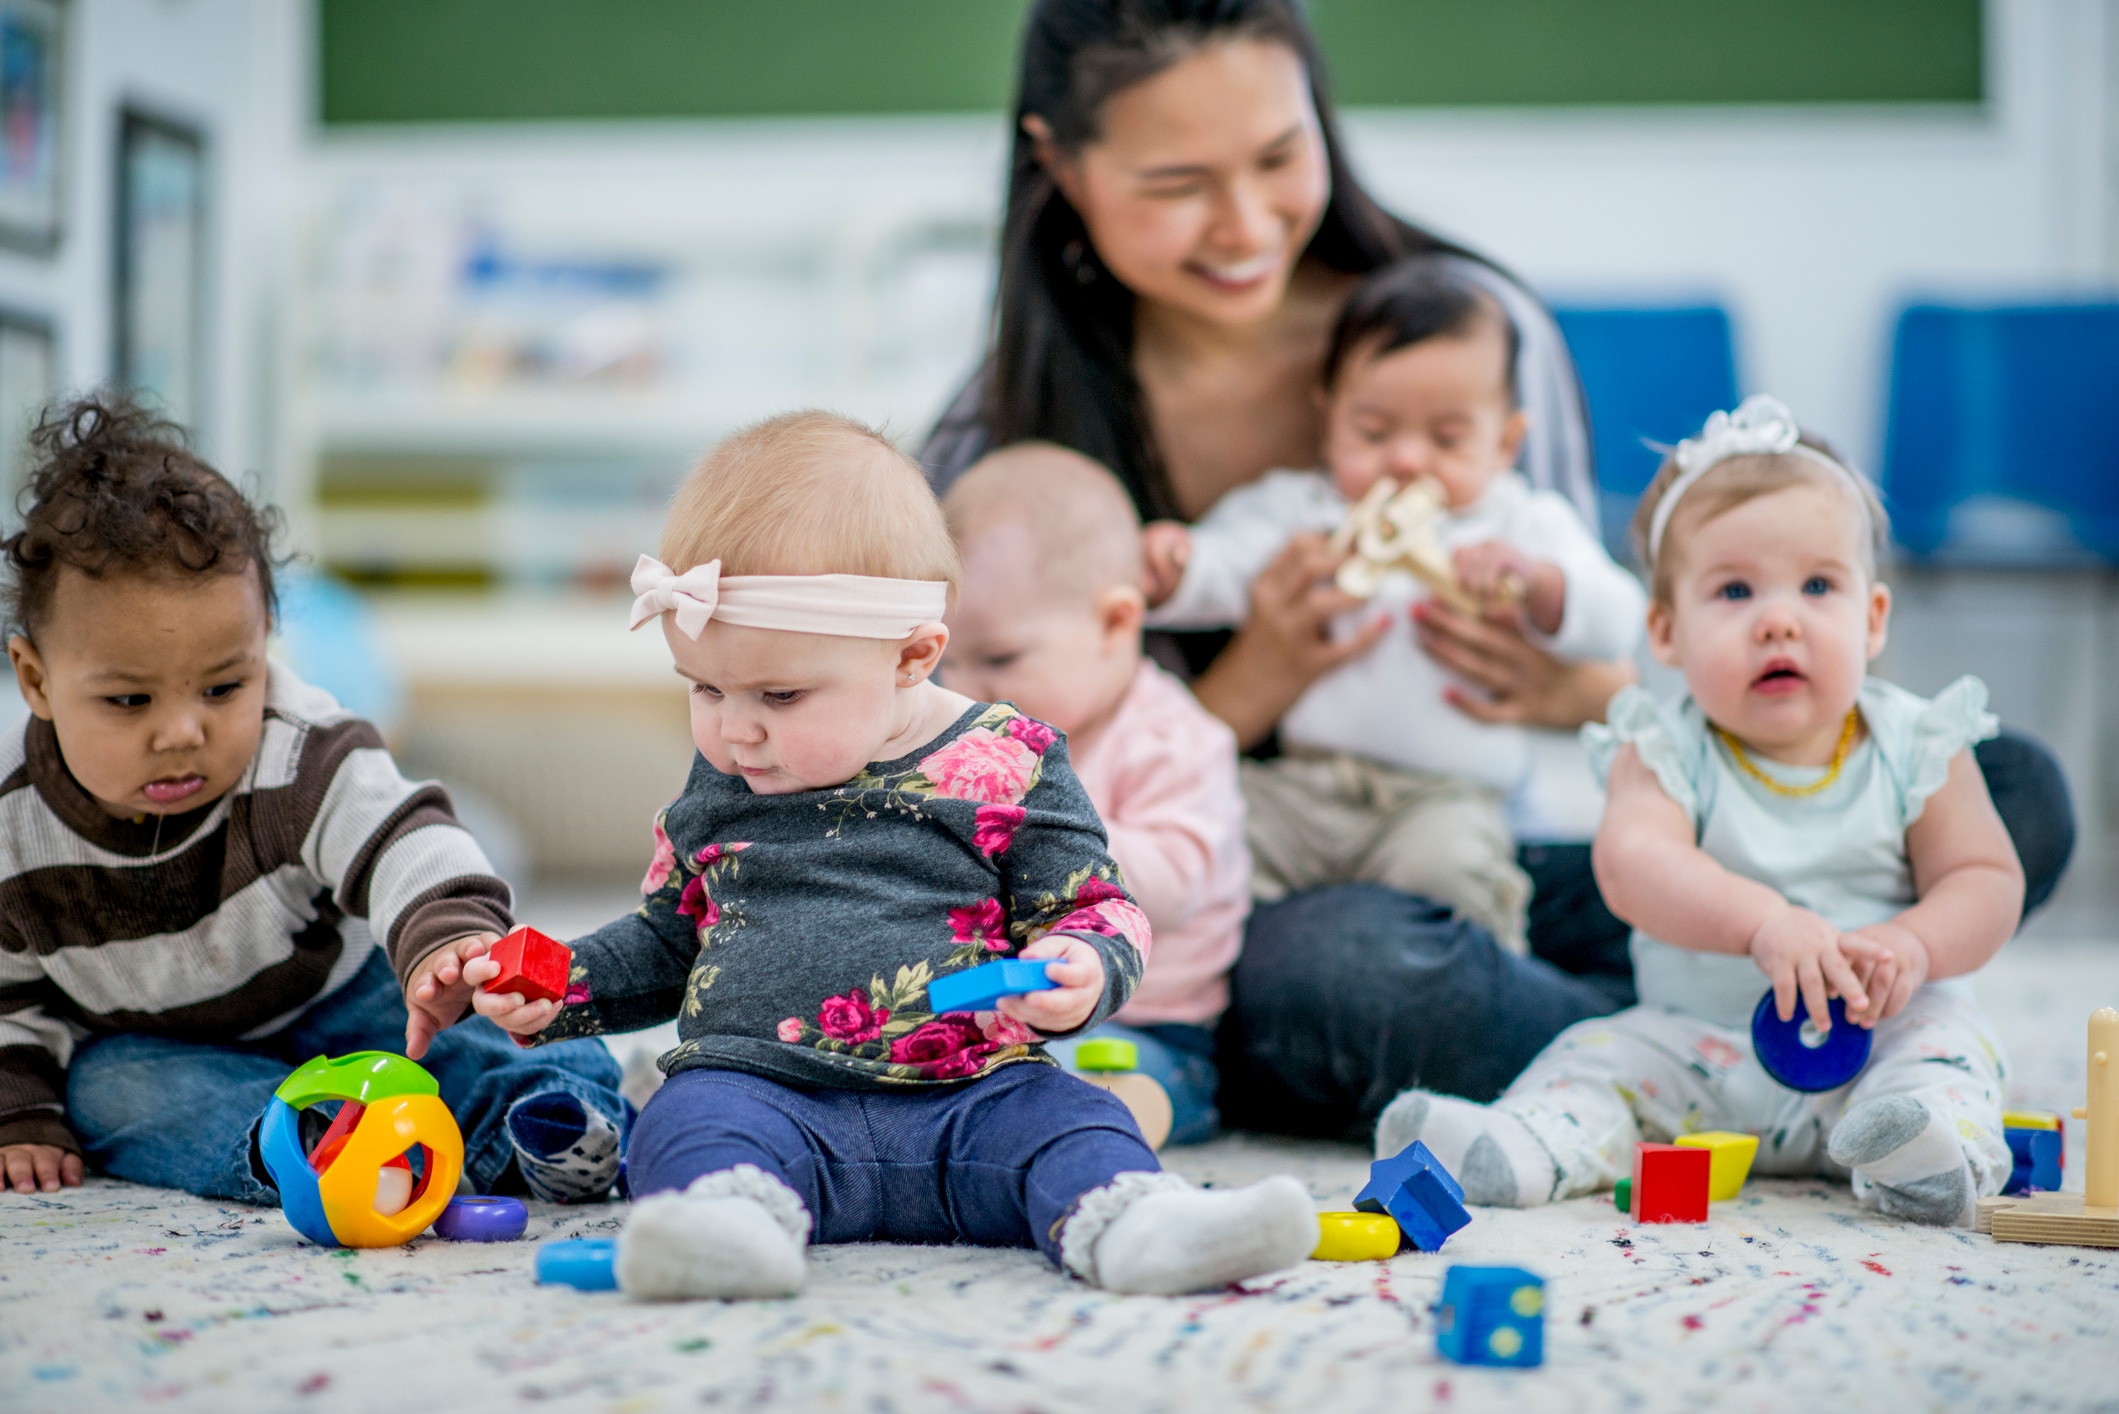 Child care assistance programs by state: How to find out if you qualify